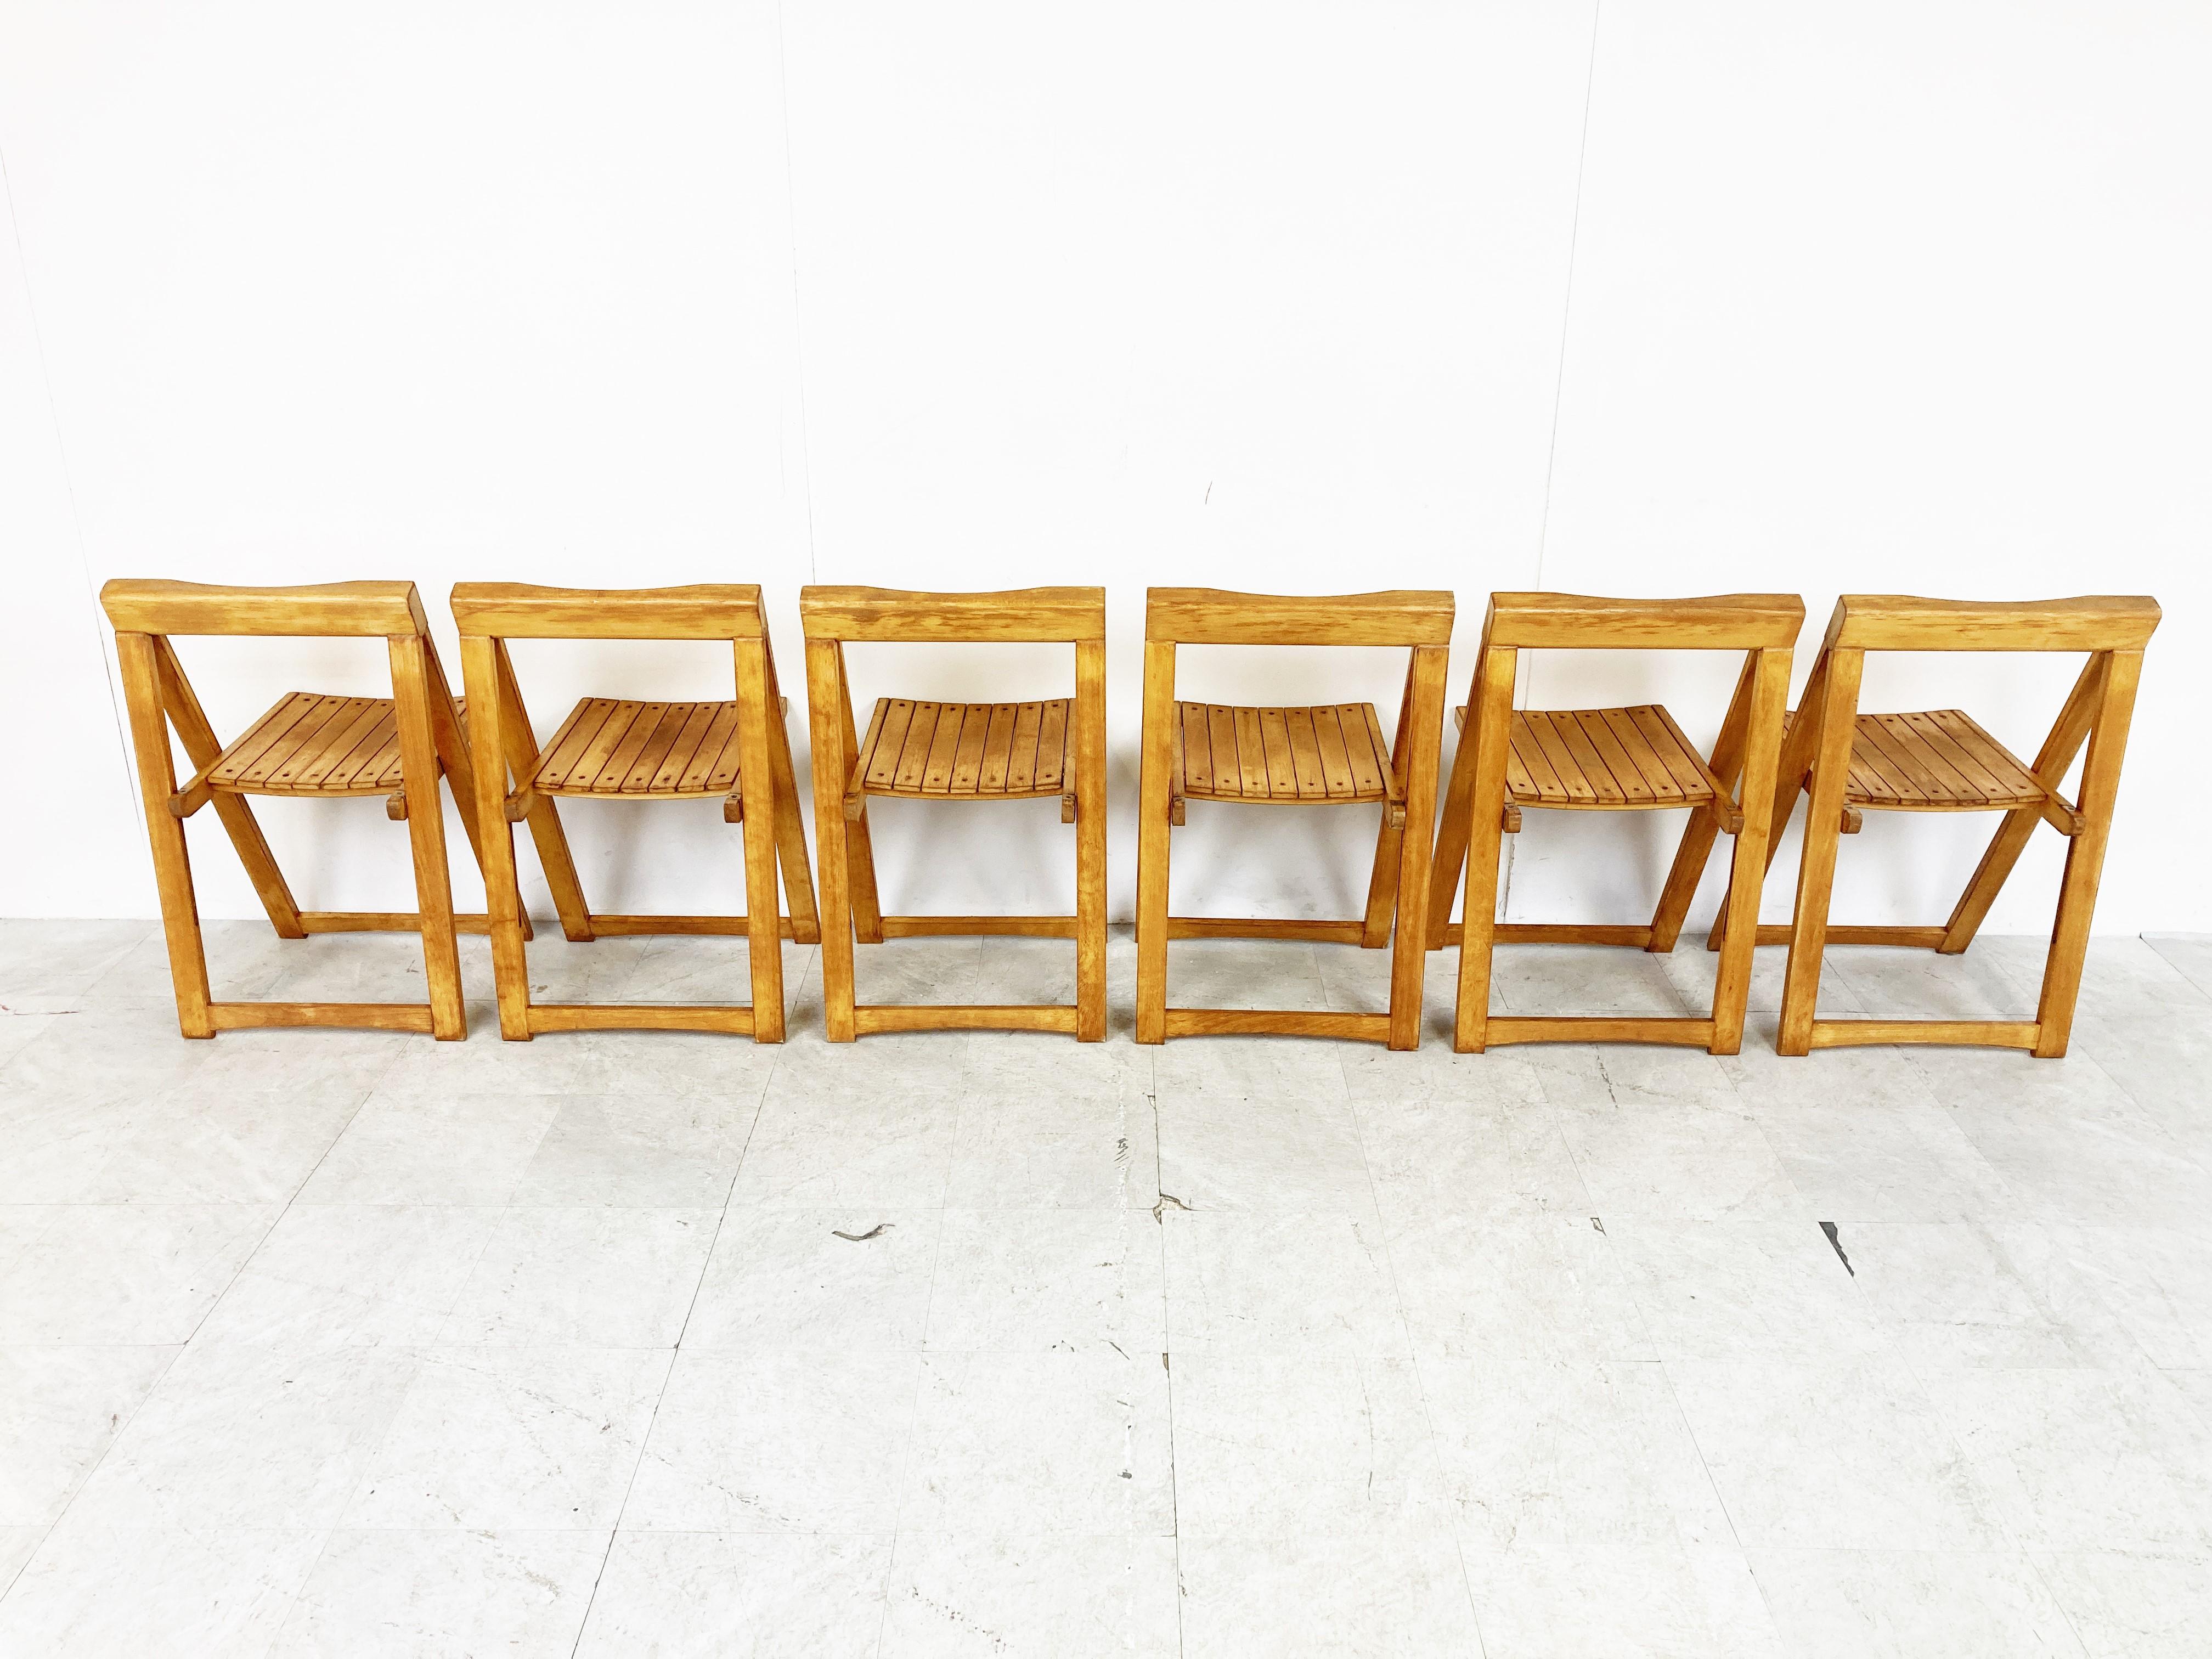 Vintage Wooden Folding Chairs, 1960s For Sale 1